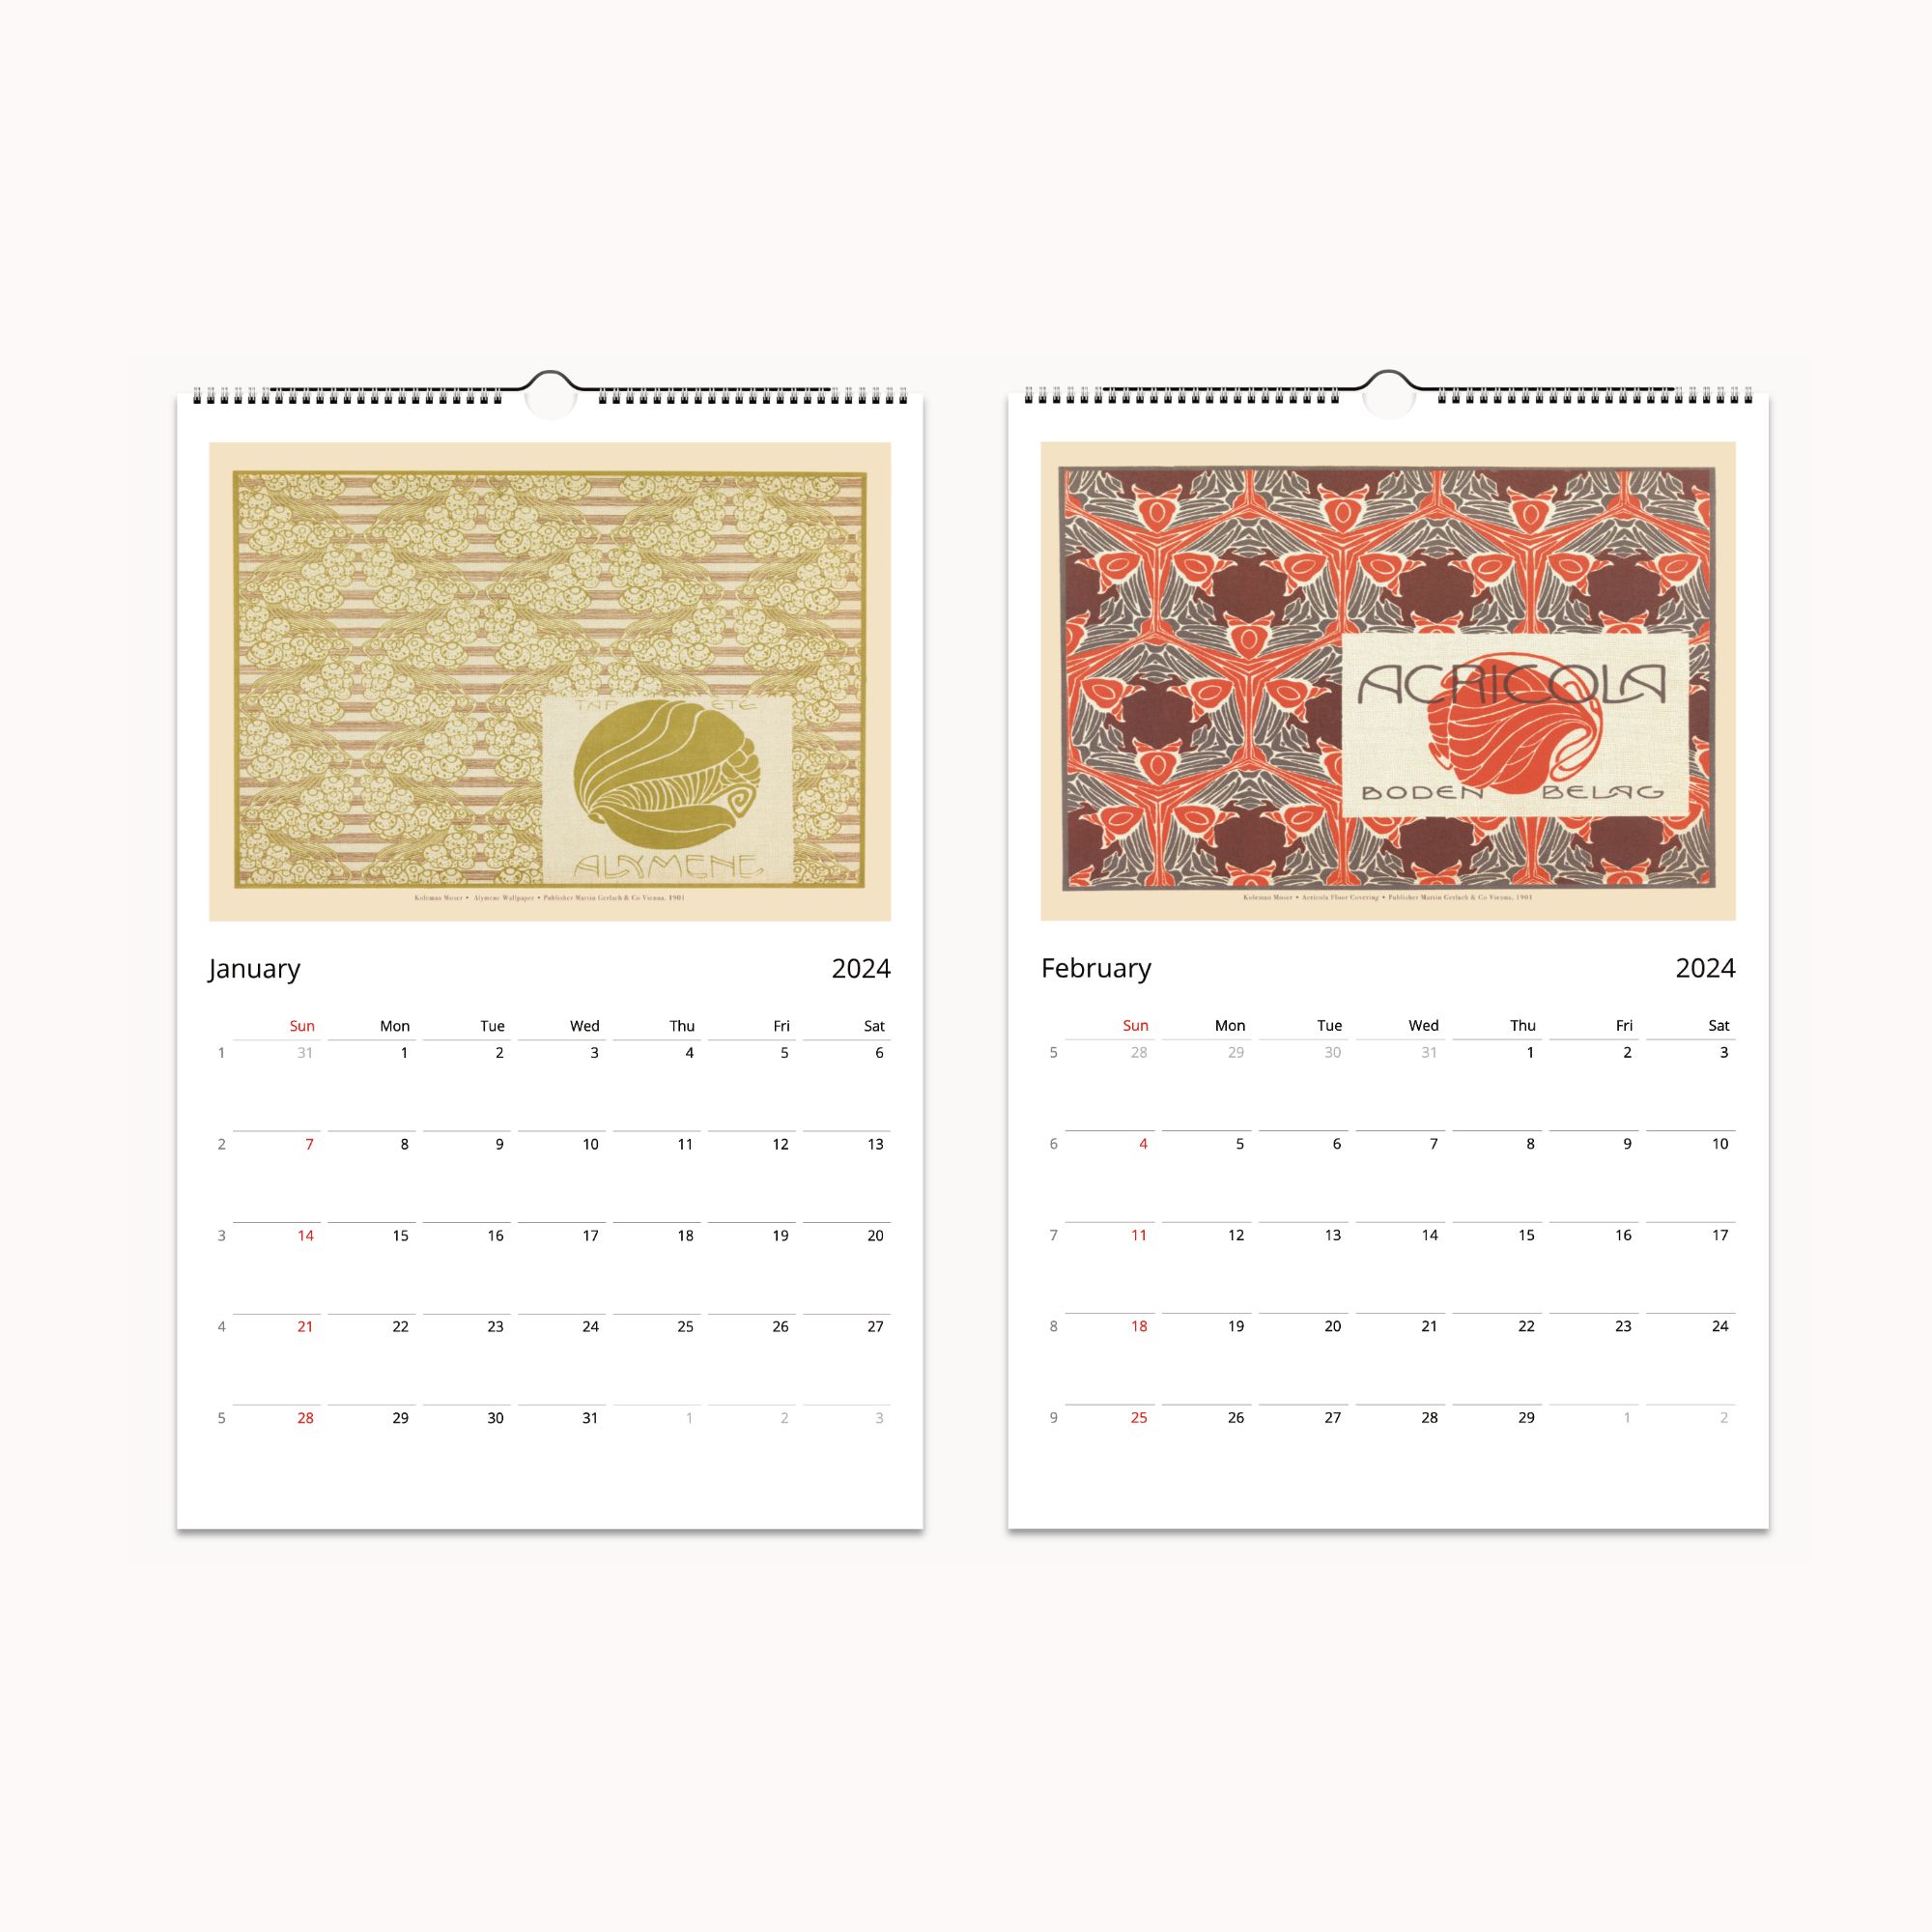 2024 Koloman Moser Wall Calendar, featuring monthly displays of his influential graphic art, ideal for enthusiasts of modernist design and the Vienna Secession movement, offering a year of artistic discovery and appreciation.